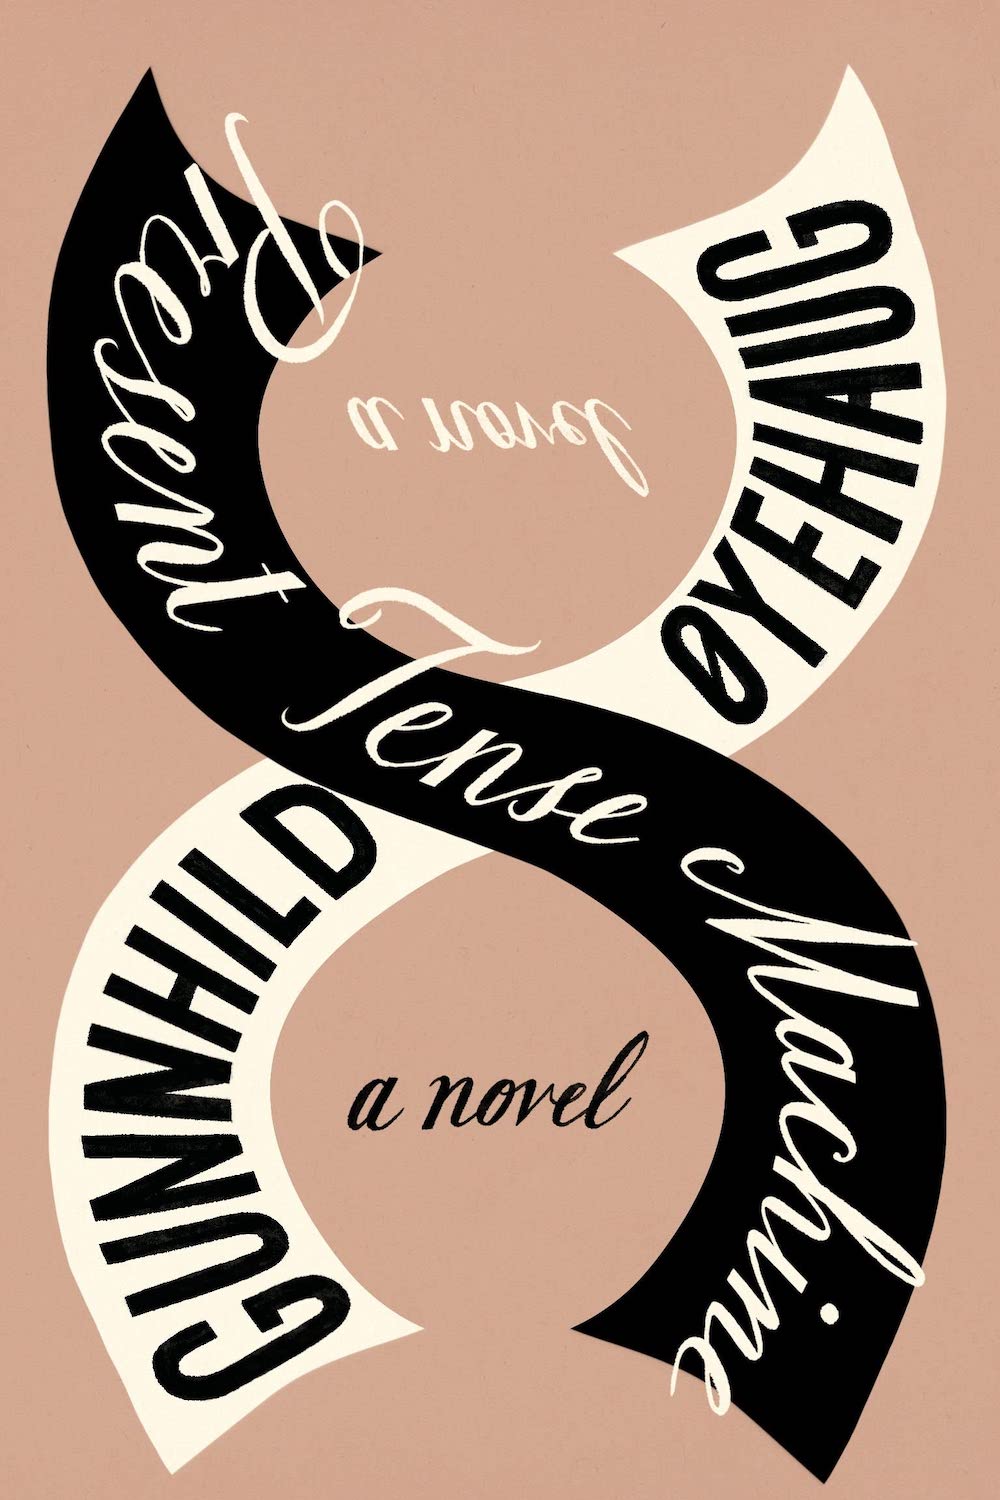 cover for grunnhild oyehaugg novel present tense machine in mix of serif and sans serfic fonts intersecting in white and black ribbonlike figure eight against a blocked tan background